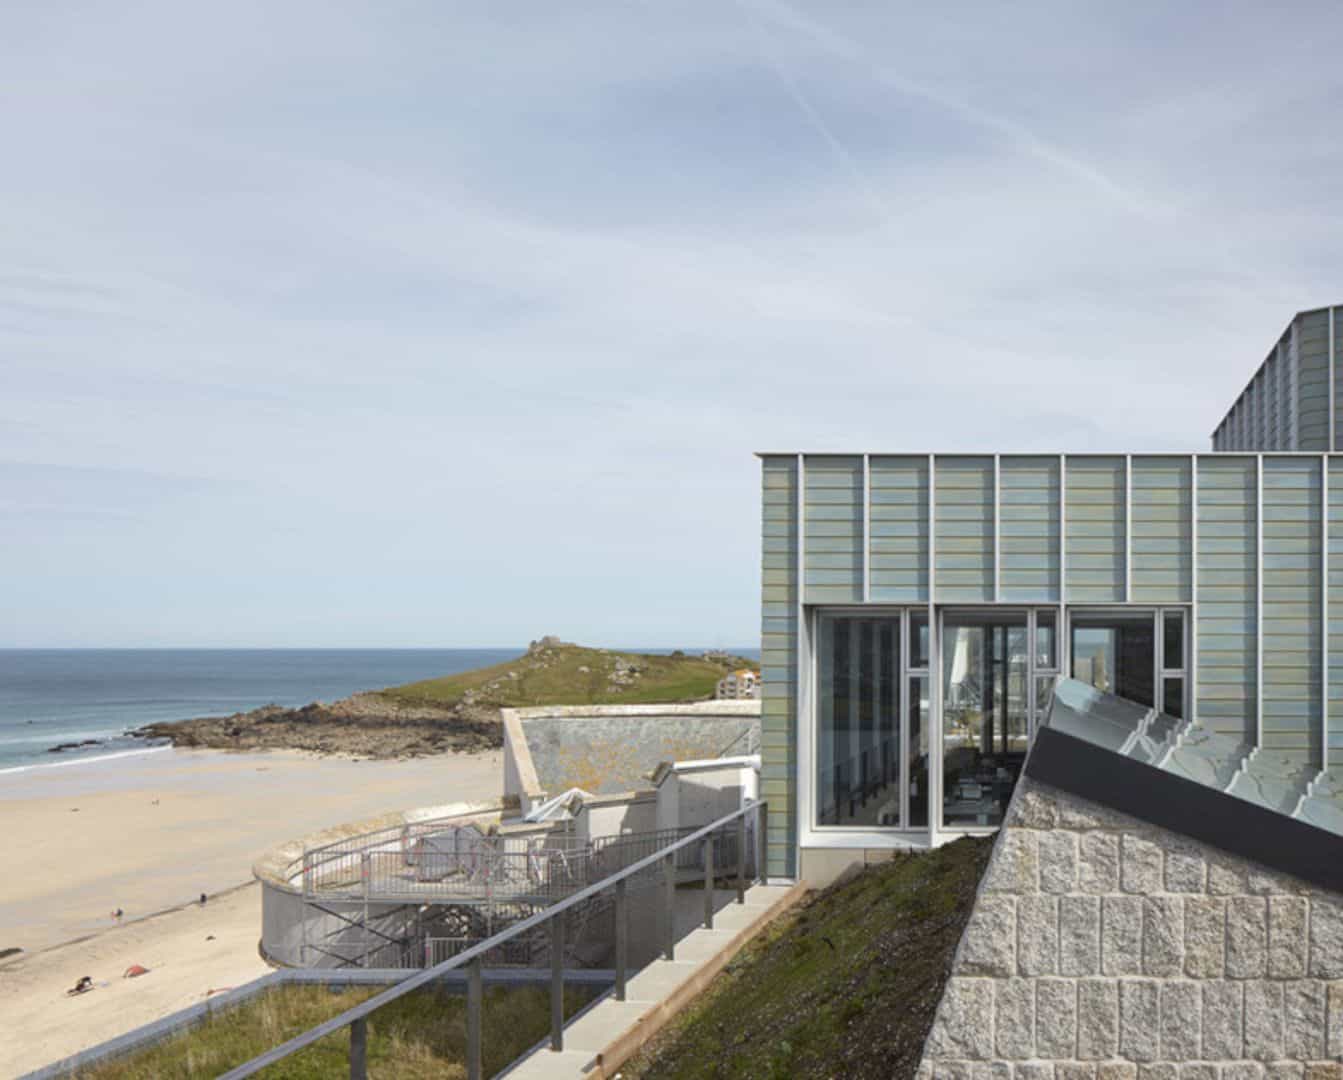 Tate St Ives A Contemporary Extension For The Original Tate St Ives Building 7